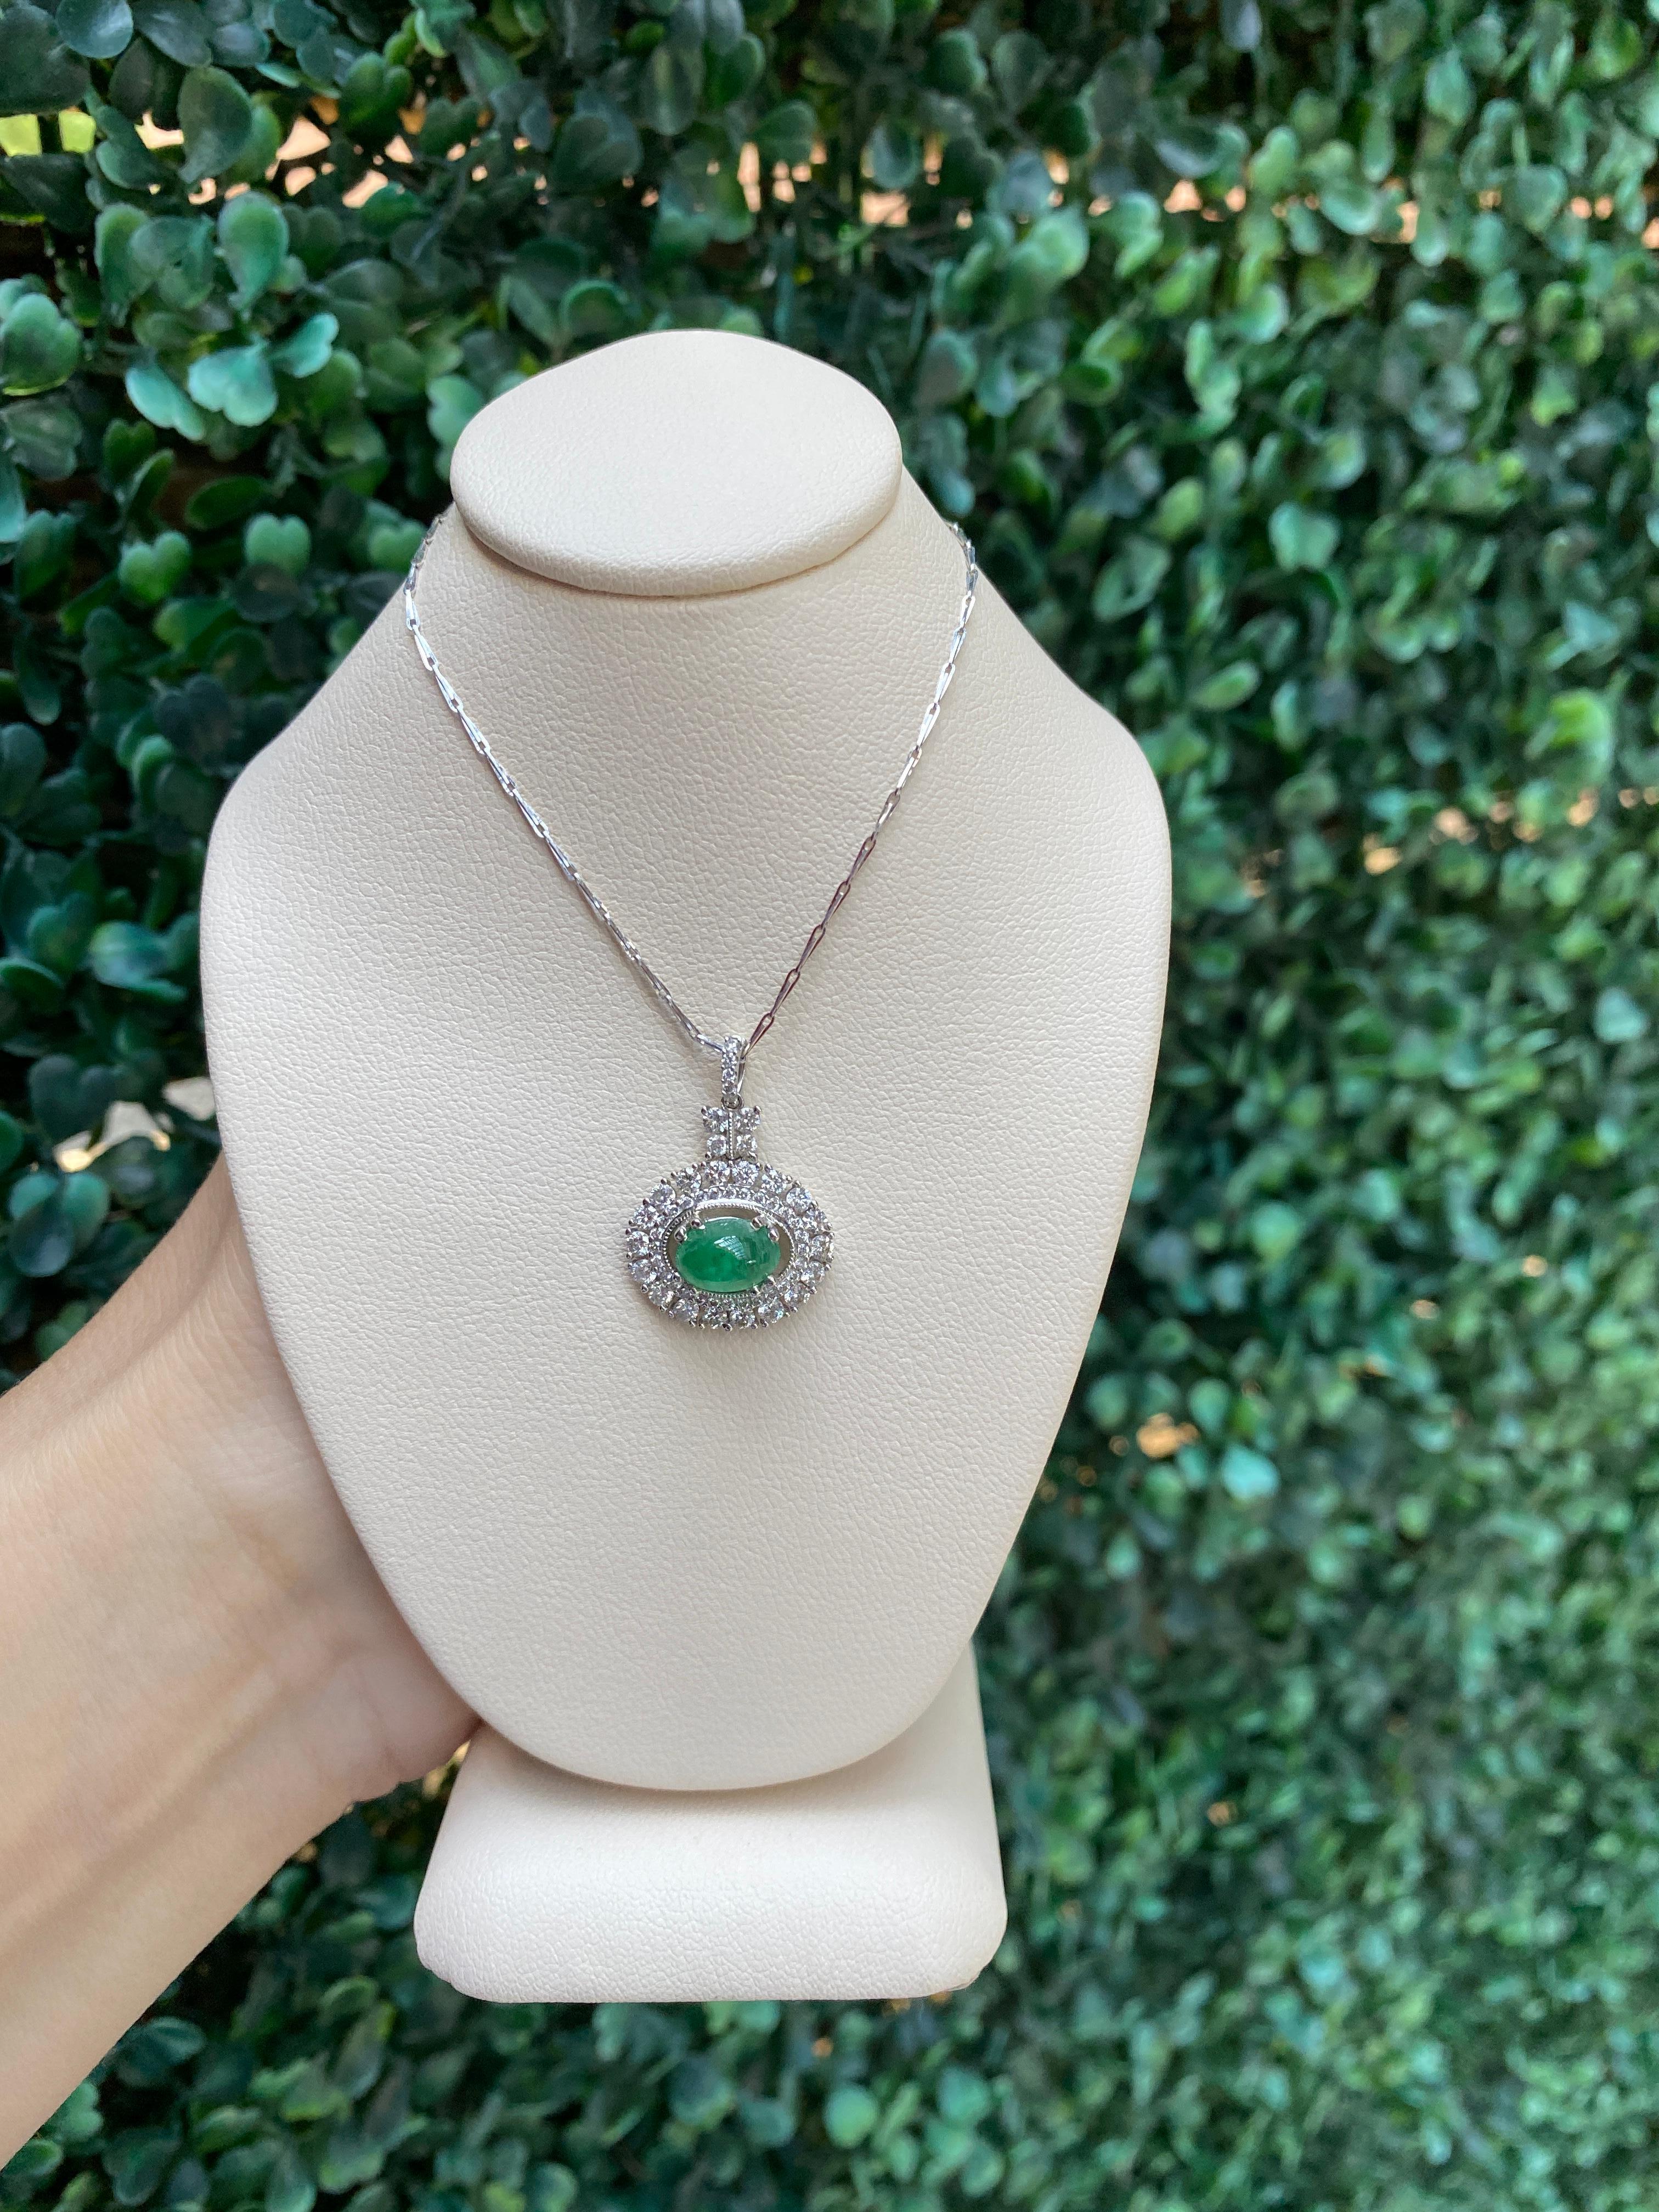 Oval Cut 1.47 Carat Oval Cabachon Emerald with 0.90ctw Accent Diamonds Pendant Necklace For Sale